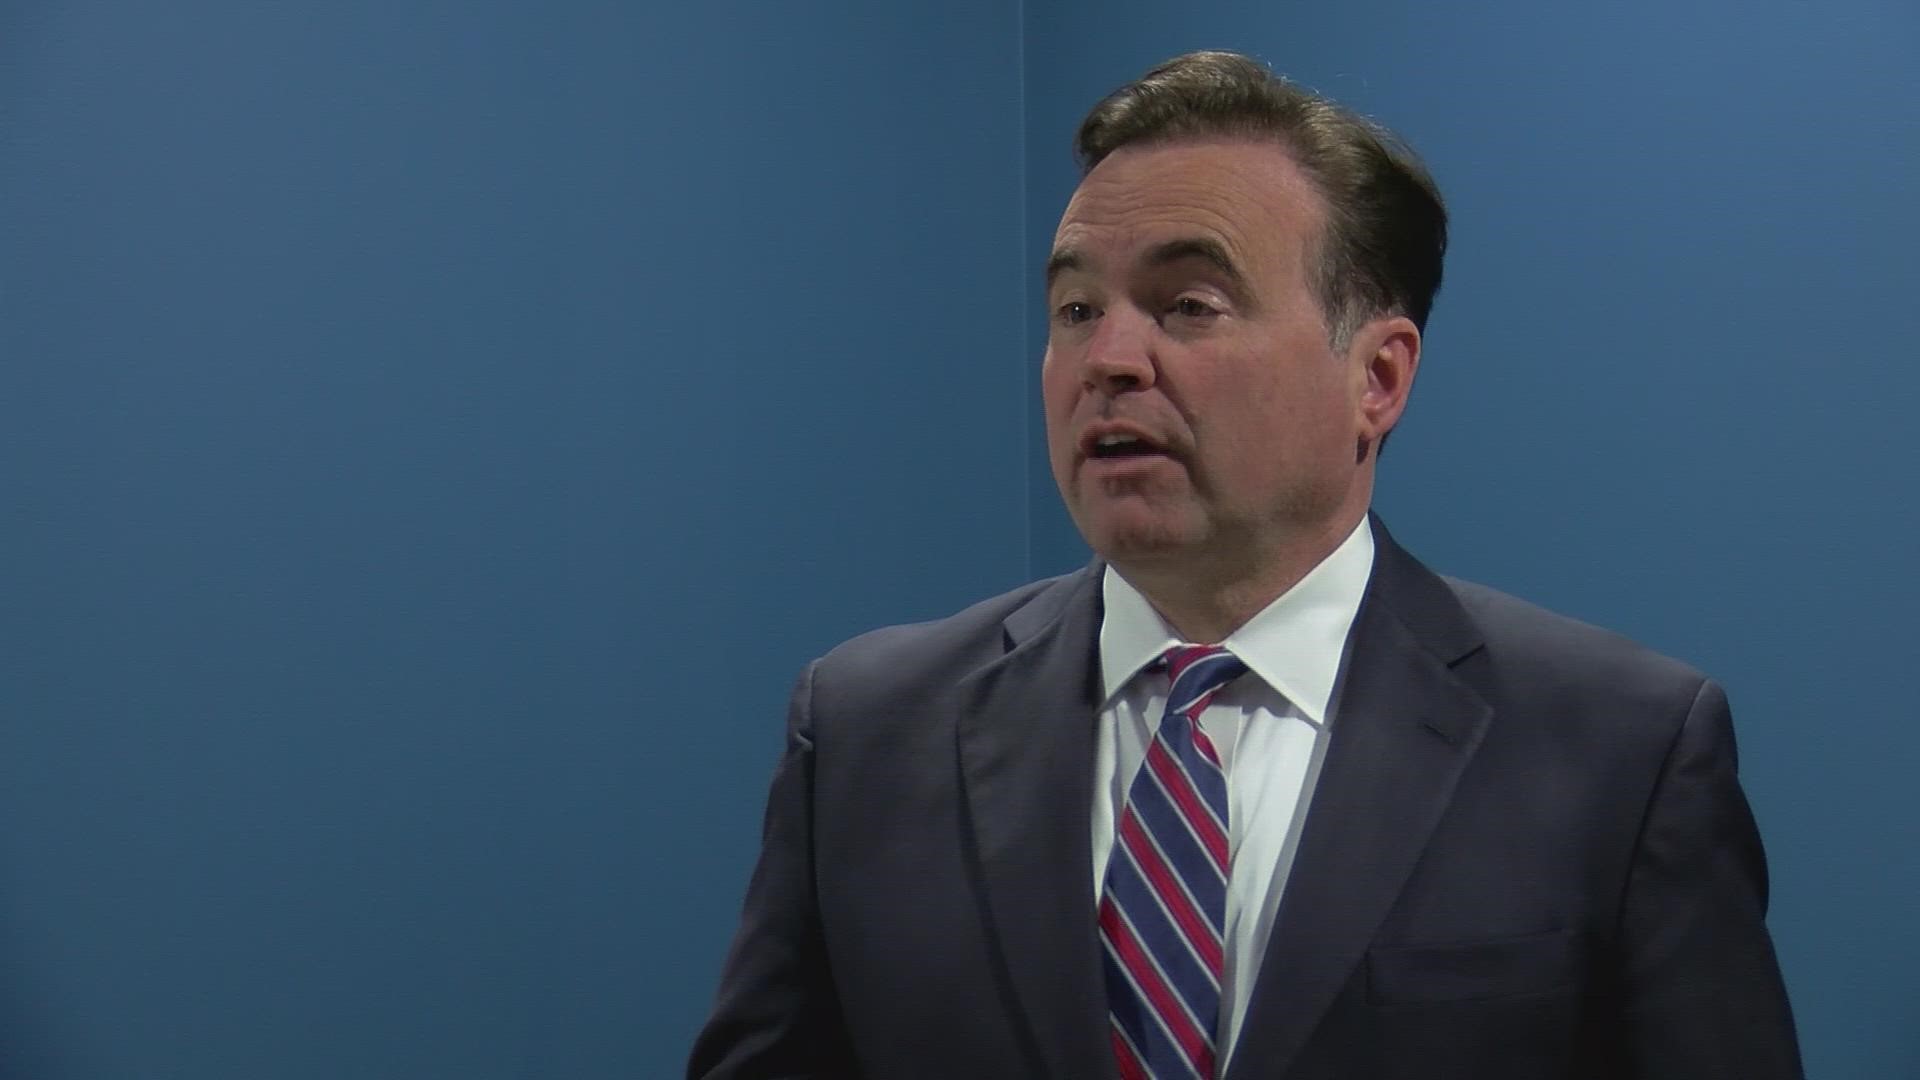 Democratic candidate for Governor John Cranley made a stop at WTOL 11 in Toledo on Saturday ahead of Tuesday's primary election.